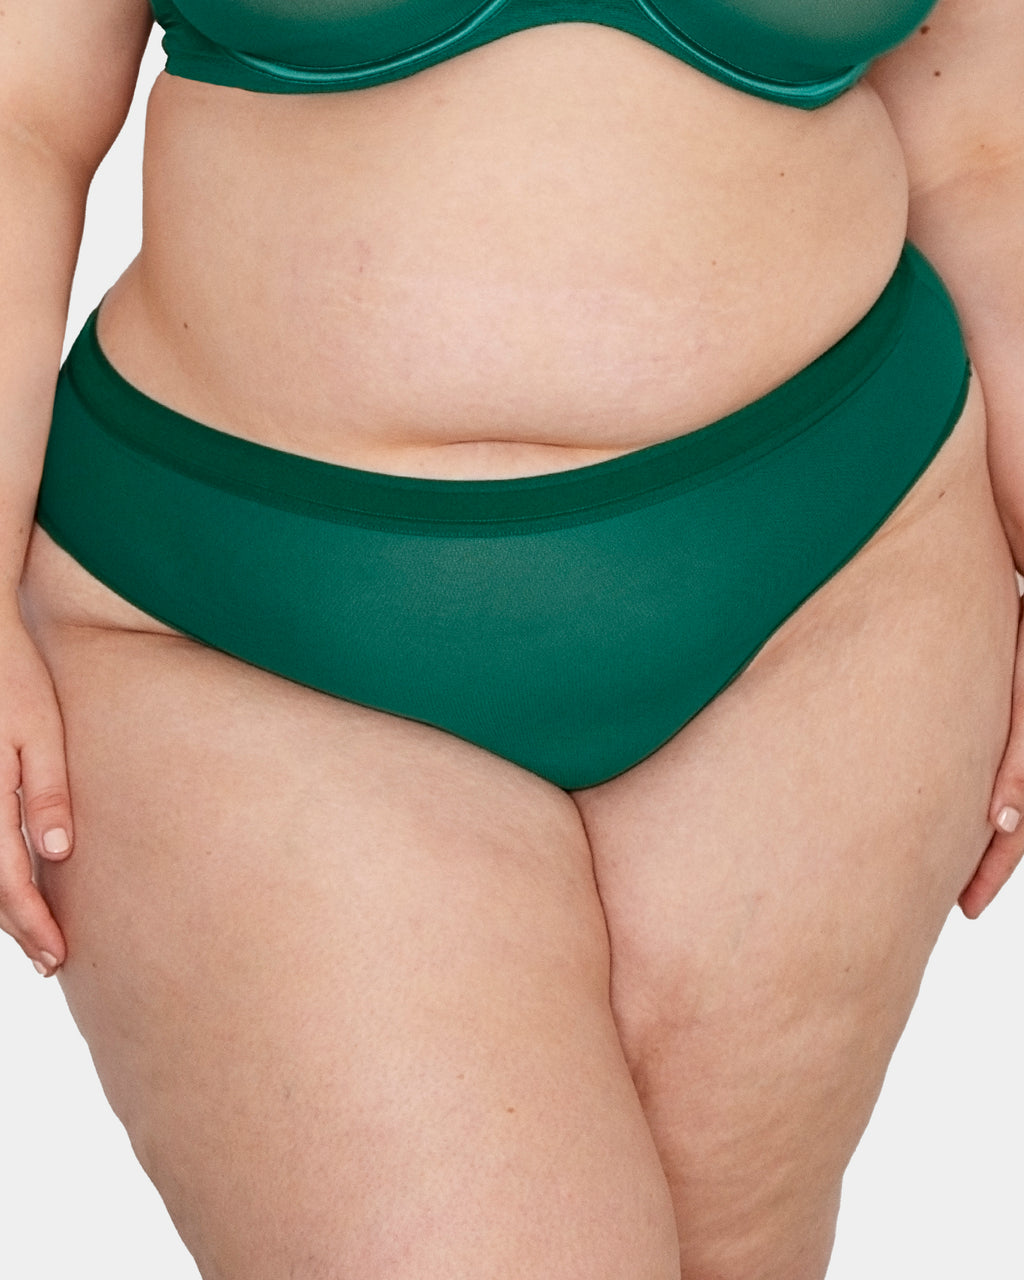 Green Transparent Panties With a High-waisted, Many Colors Sheer